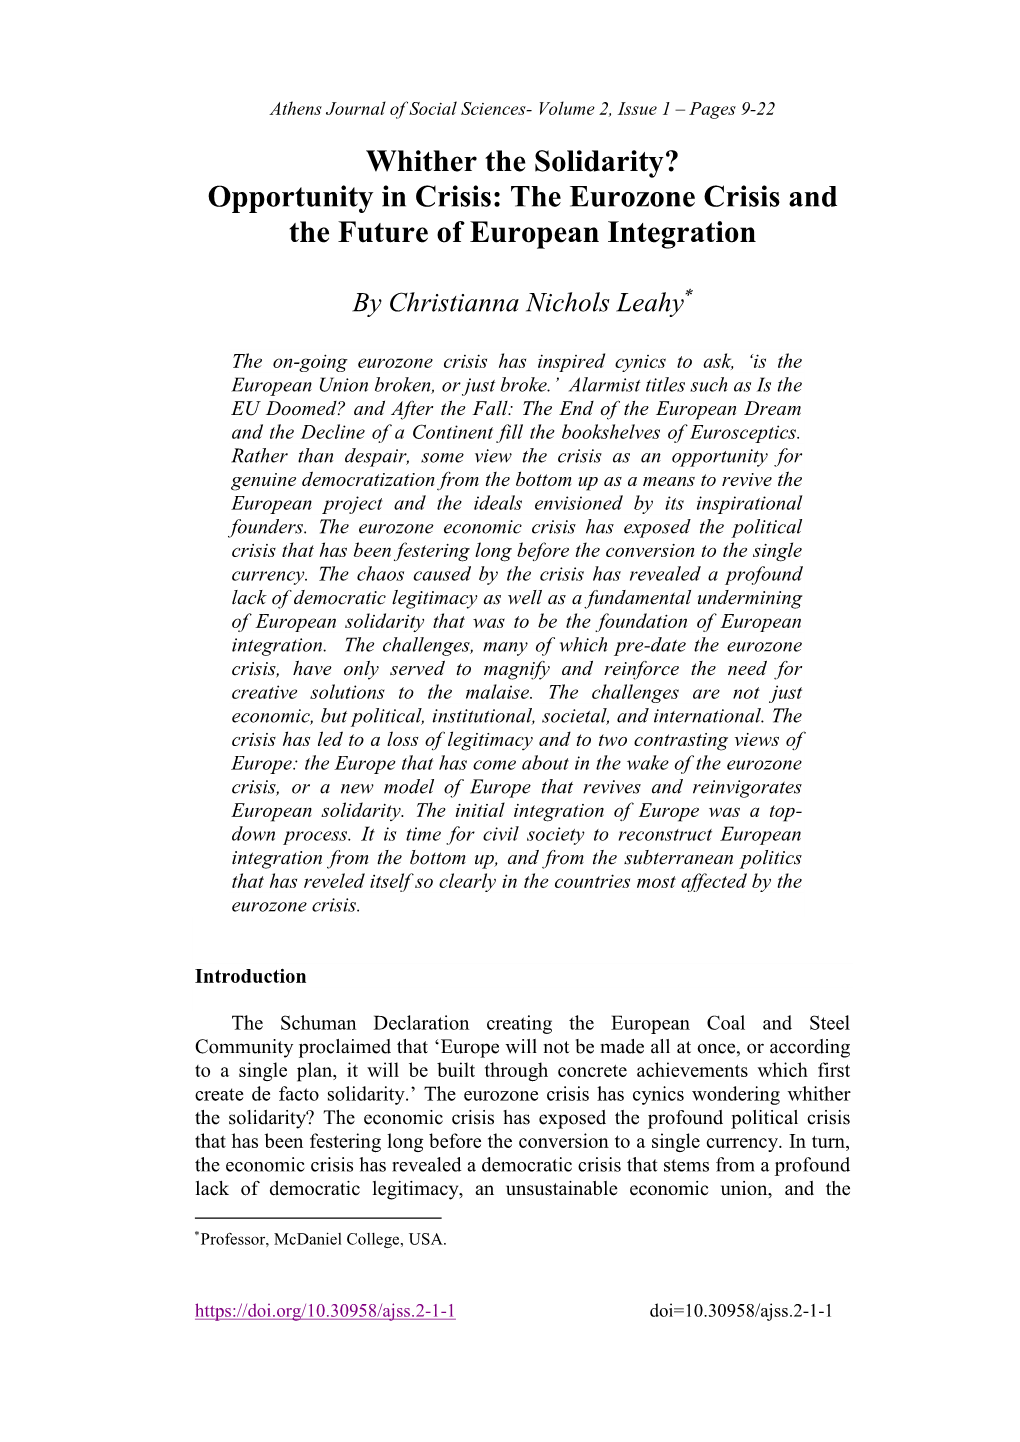 Whither the Solidarity? Opportunity in Crisis: the Eurozone Crisis and the Future of European Integration